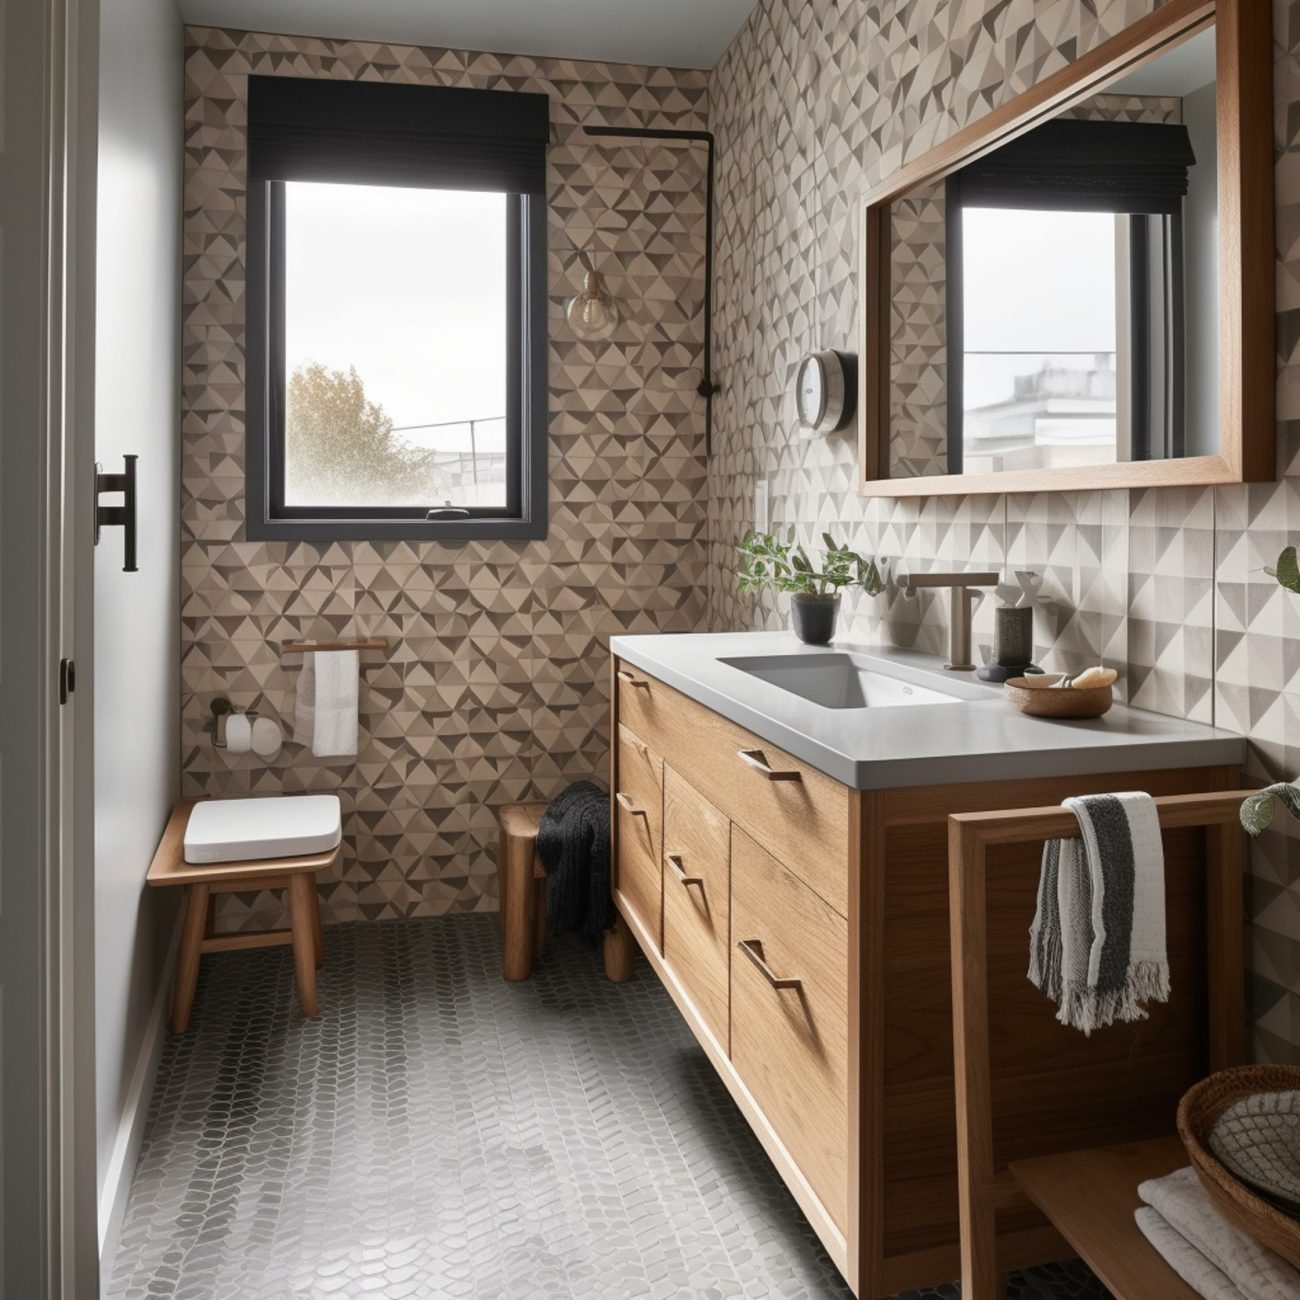 Modern Transitional style Bathroom with a stylish geometric-patterned wallpaper, wooden vanity and window